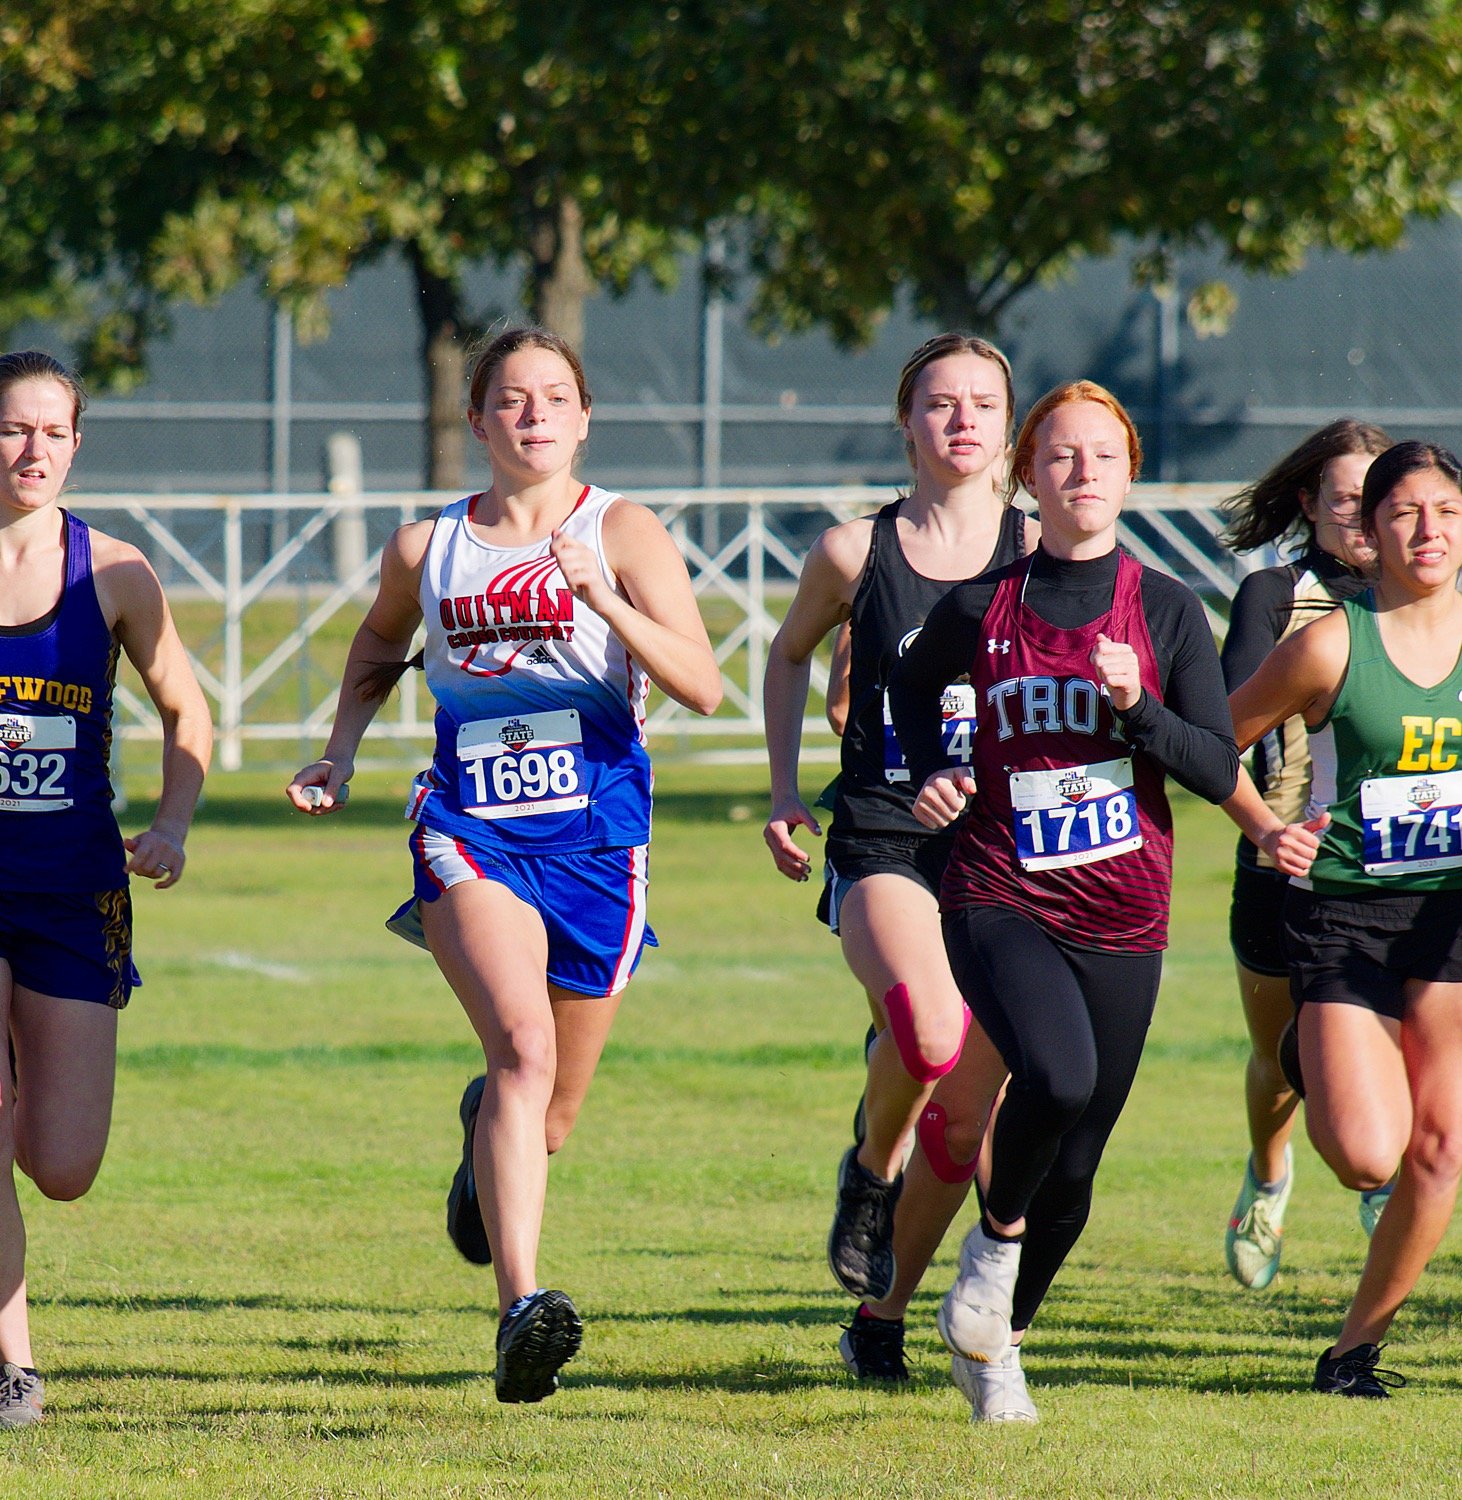 Madyson Pence finds some breathing room in the crowded start to the 2021 state cross country meet. Pence would finish in 13:00.4 for 61st place. [see more sports from throughout the year]